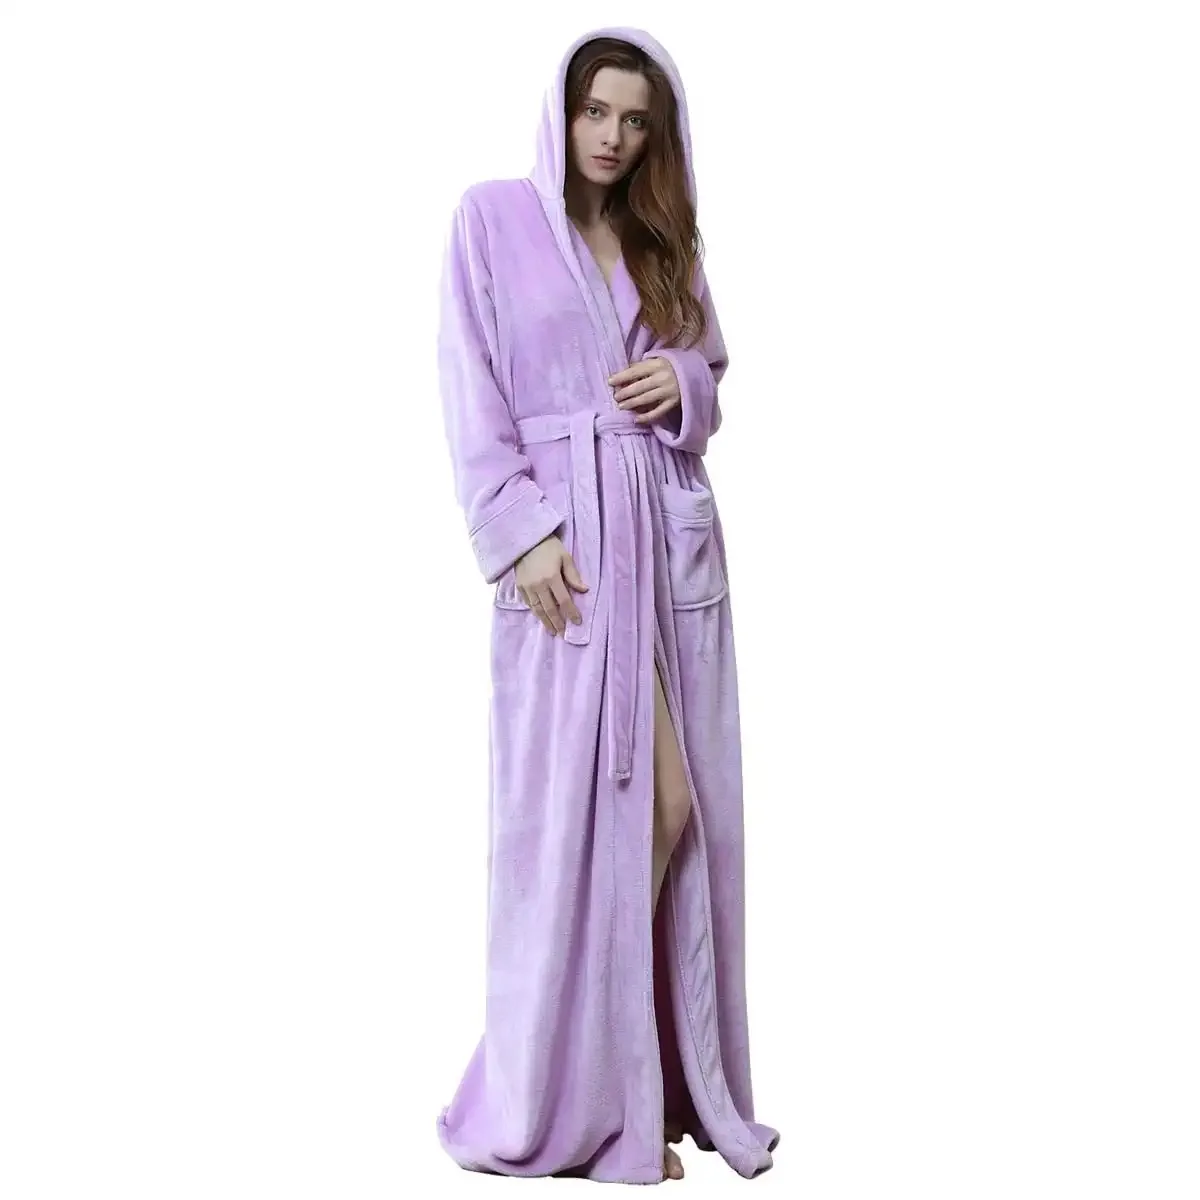 Women's Winter Fluffy Bathrobe Solid Hooded Thick Ladies Dressing Gown With Sashes Pockets Long Sleeve Kimono For Female